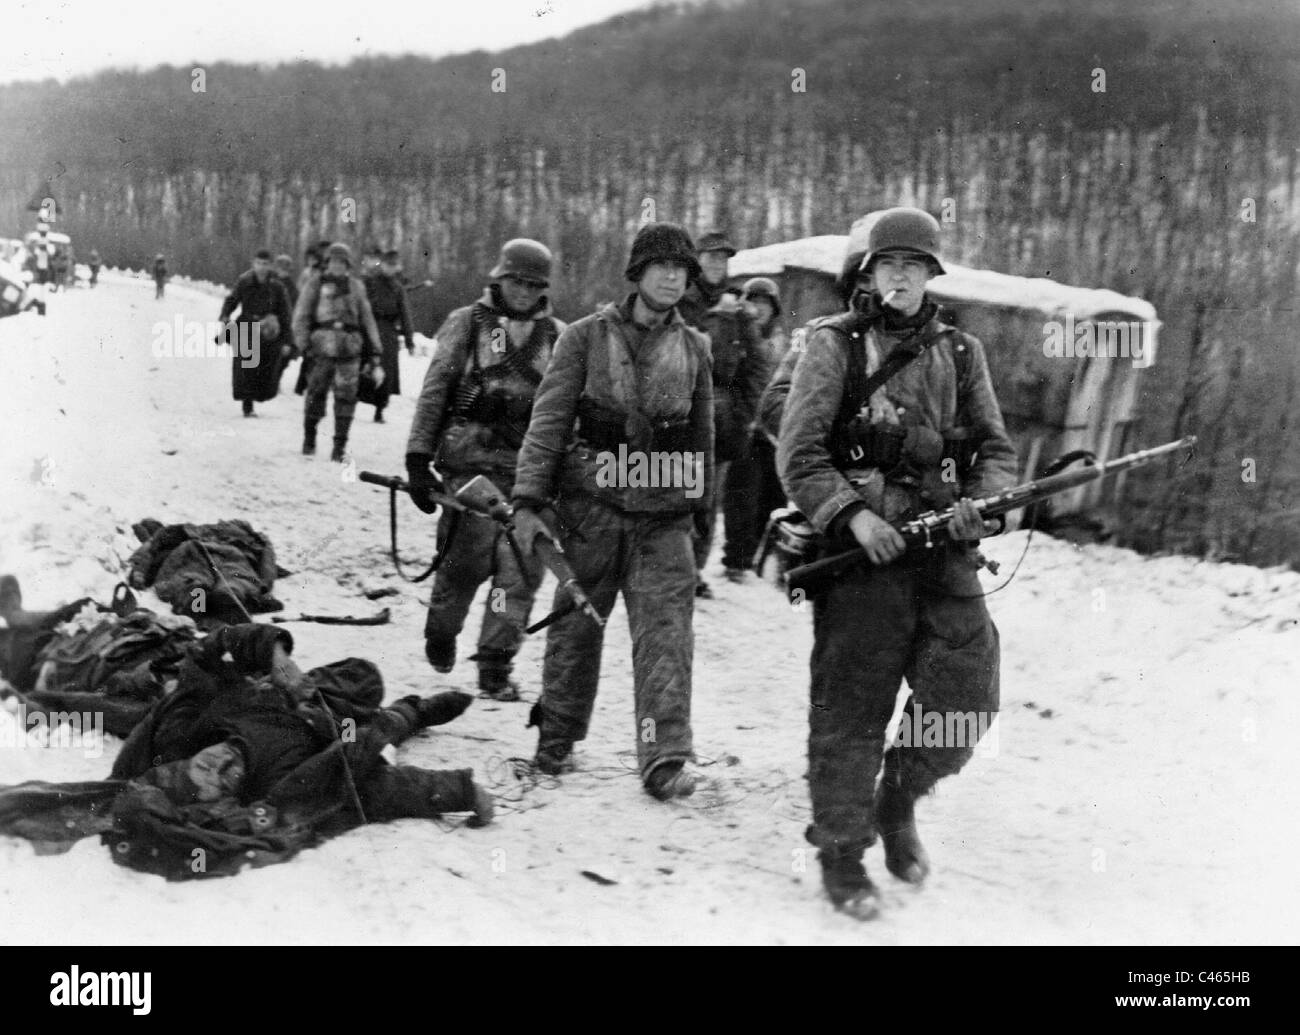 Soldiers of the Waffen-SS fighting in Hungary, 1944 Stock Photo